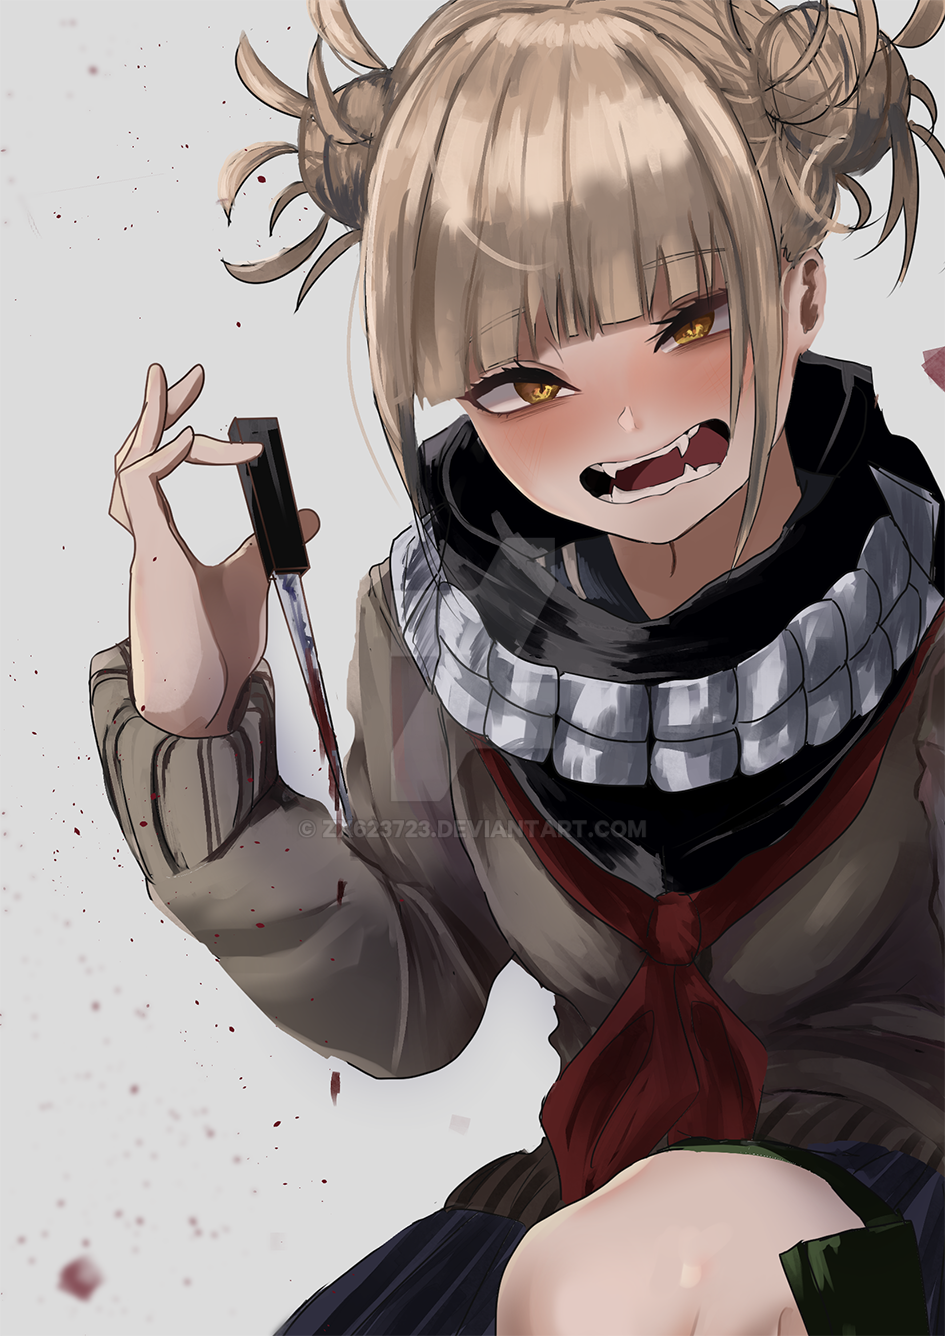 TOGA by zx623723 on DeviantArt